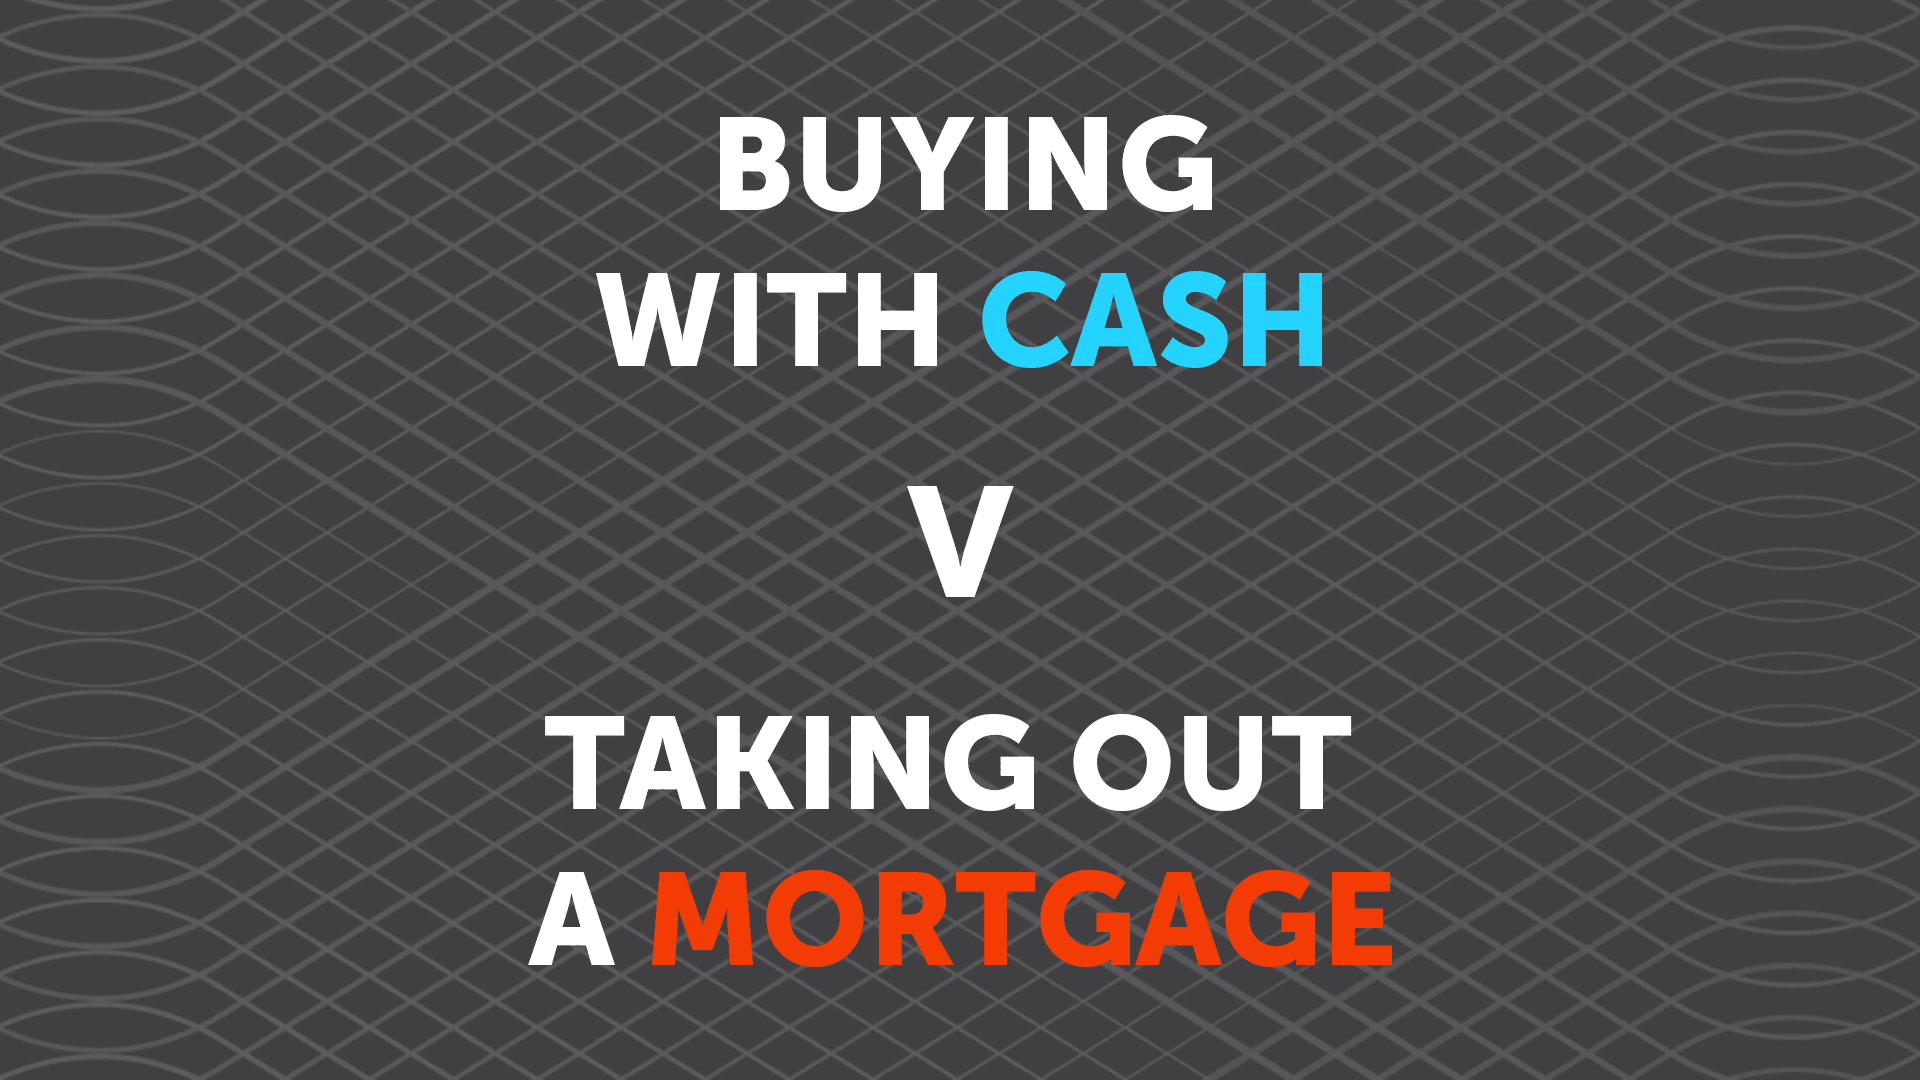 Buying a Property with Cash - Better than a Mortgage?